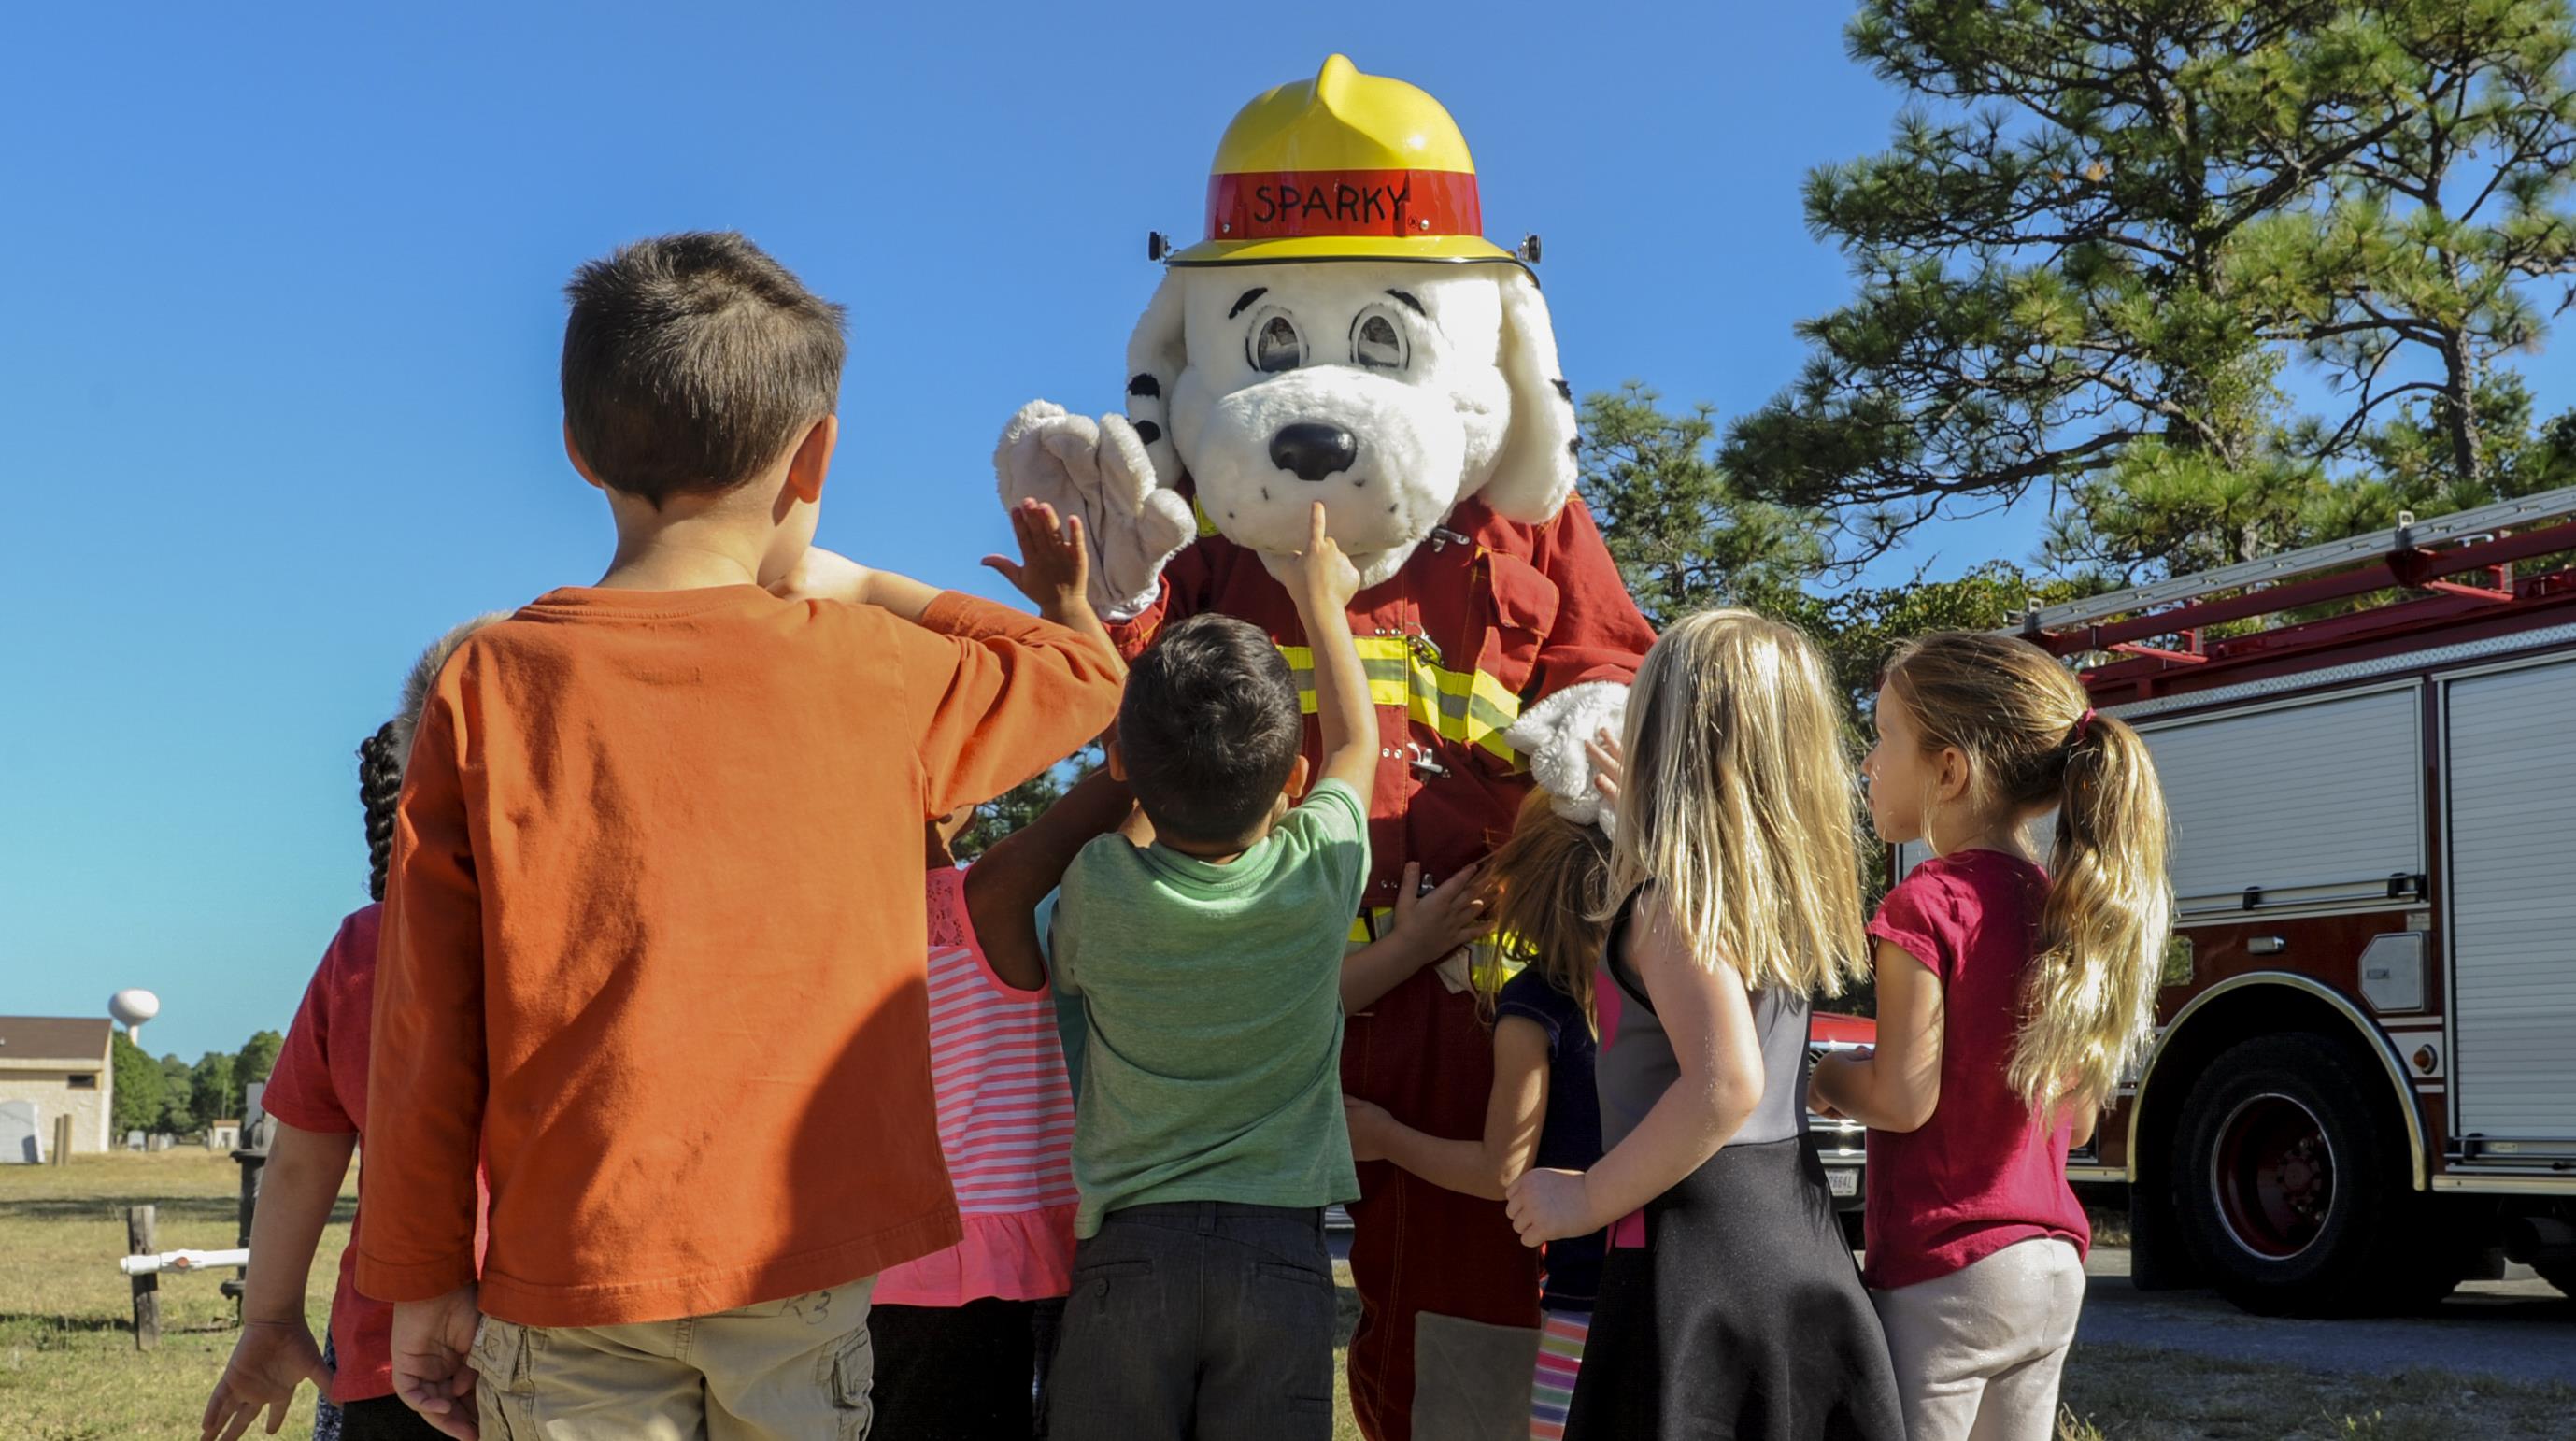 What does Sparky the Fire Dog represent?